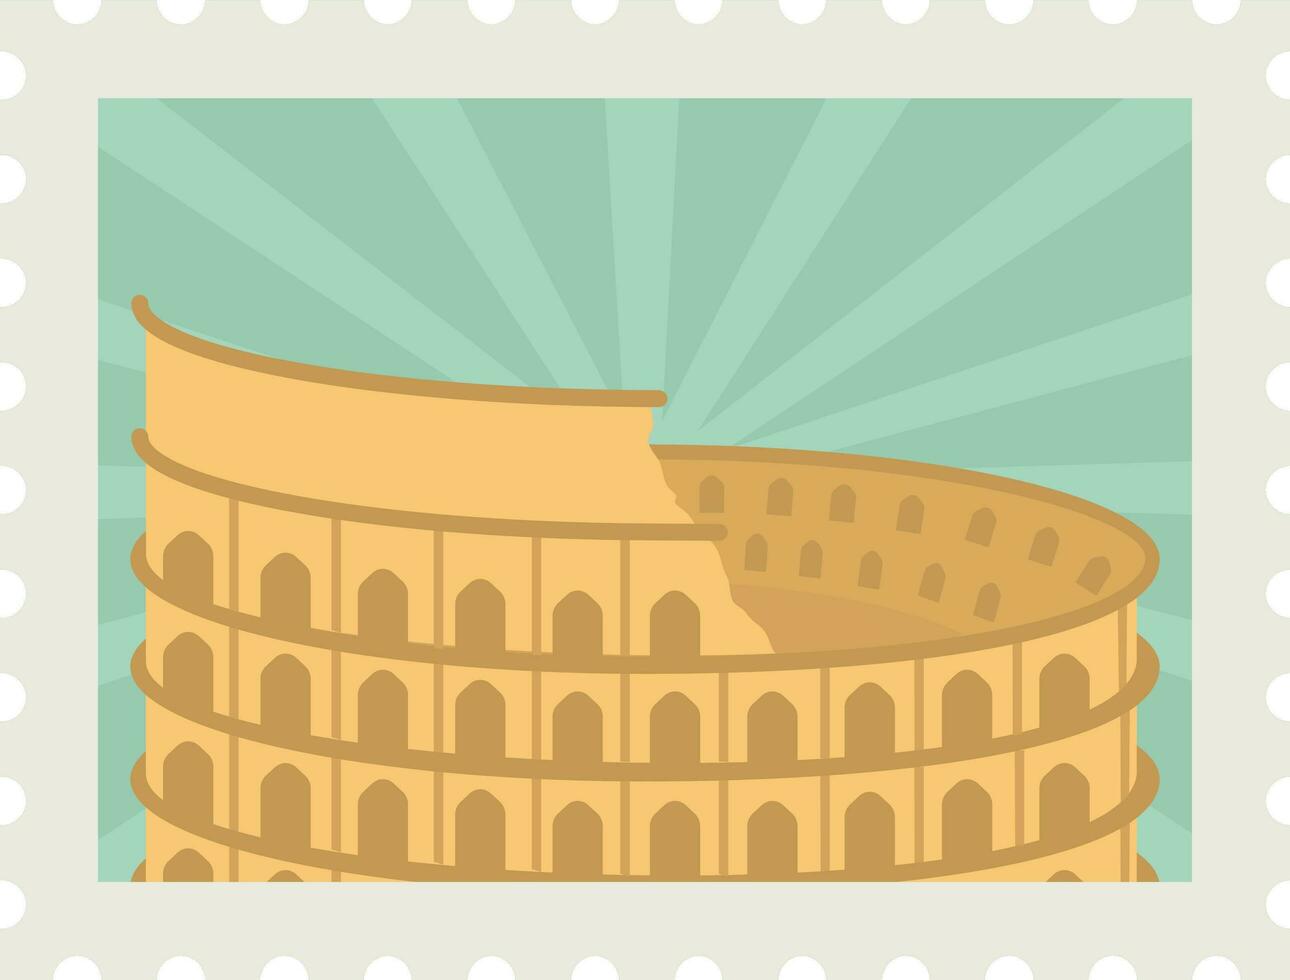 Orange Colosseum Against Green Rays Background For Stamp Or Label Design. vector